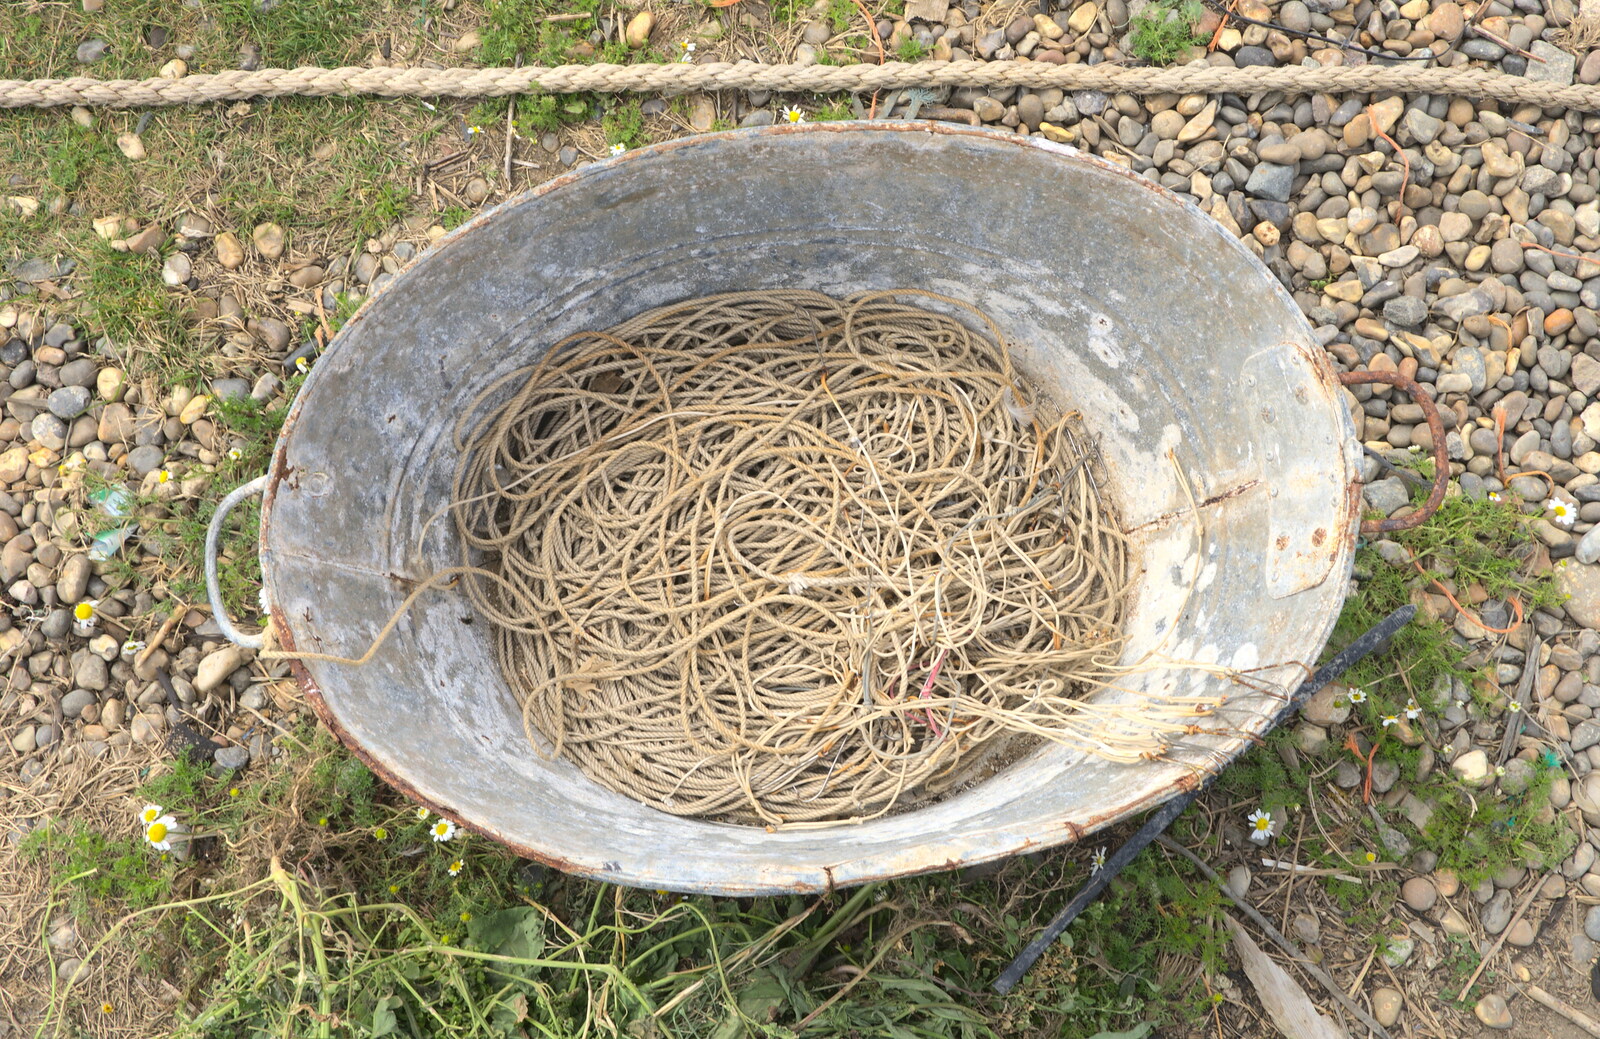 An bath with a load of thin rope, like worms from The Danger of Trees: A Camping (Mis)adventure - Southwold, Suffolk - 3rd August 2015